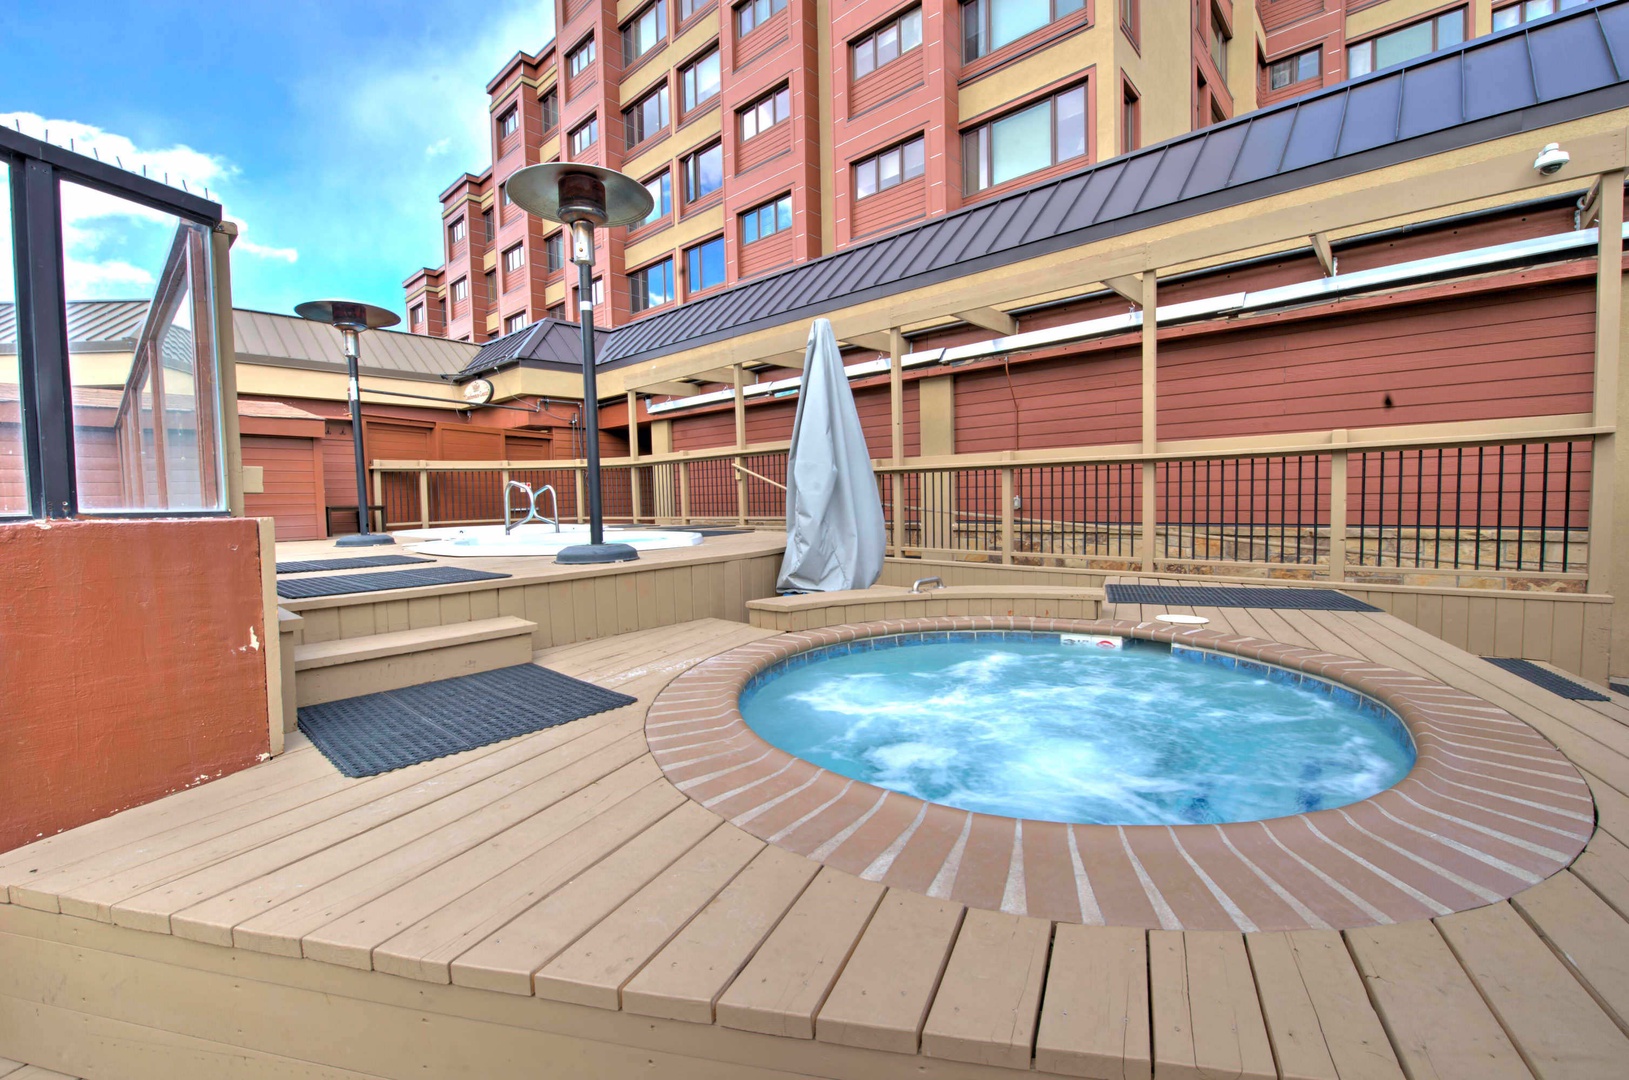 Hot tub and swimming pool in resort